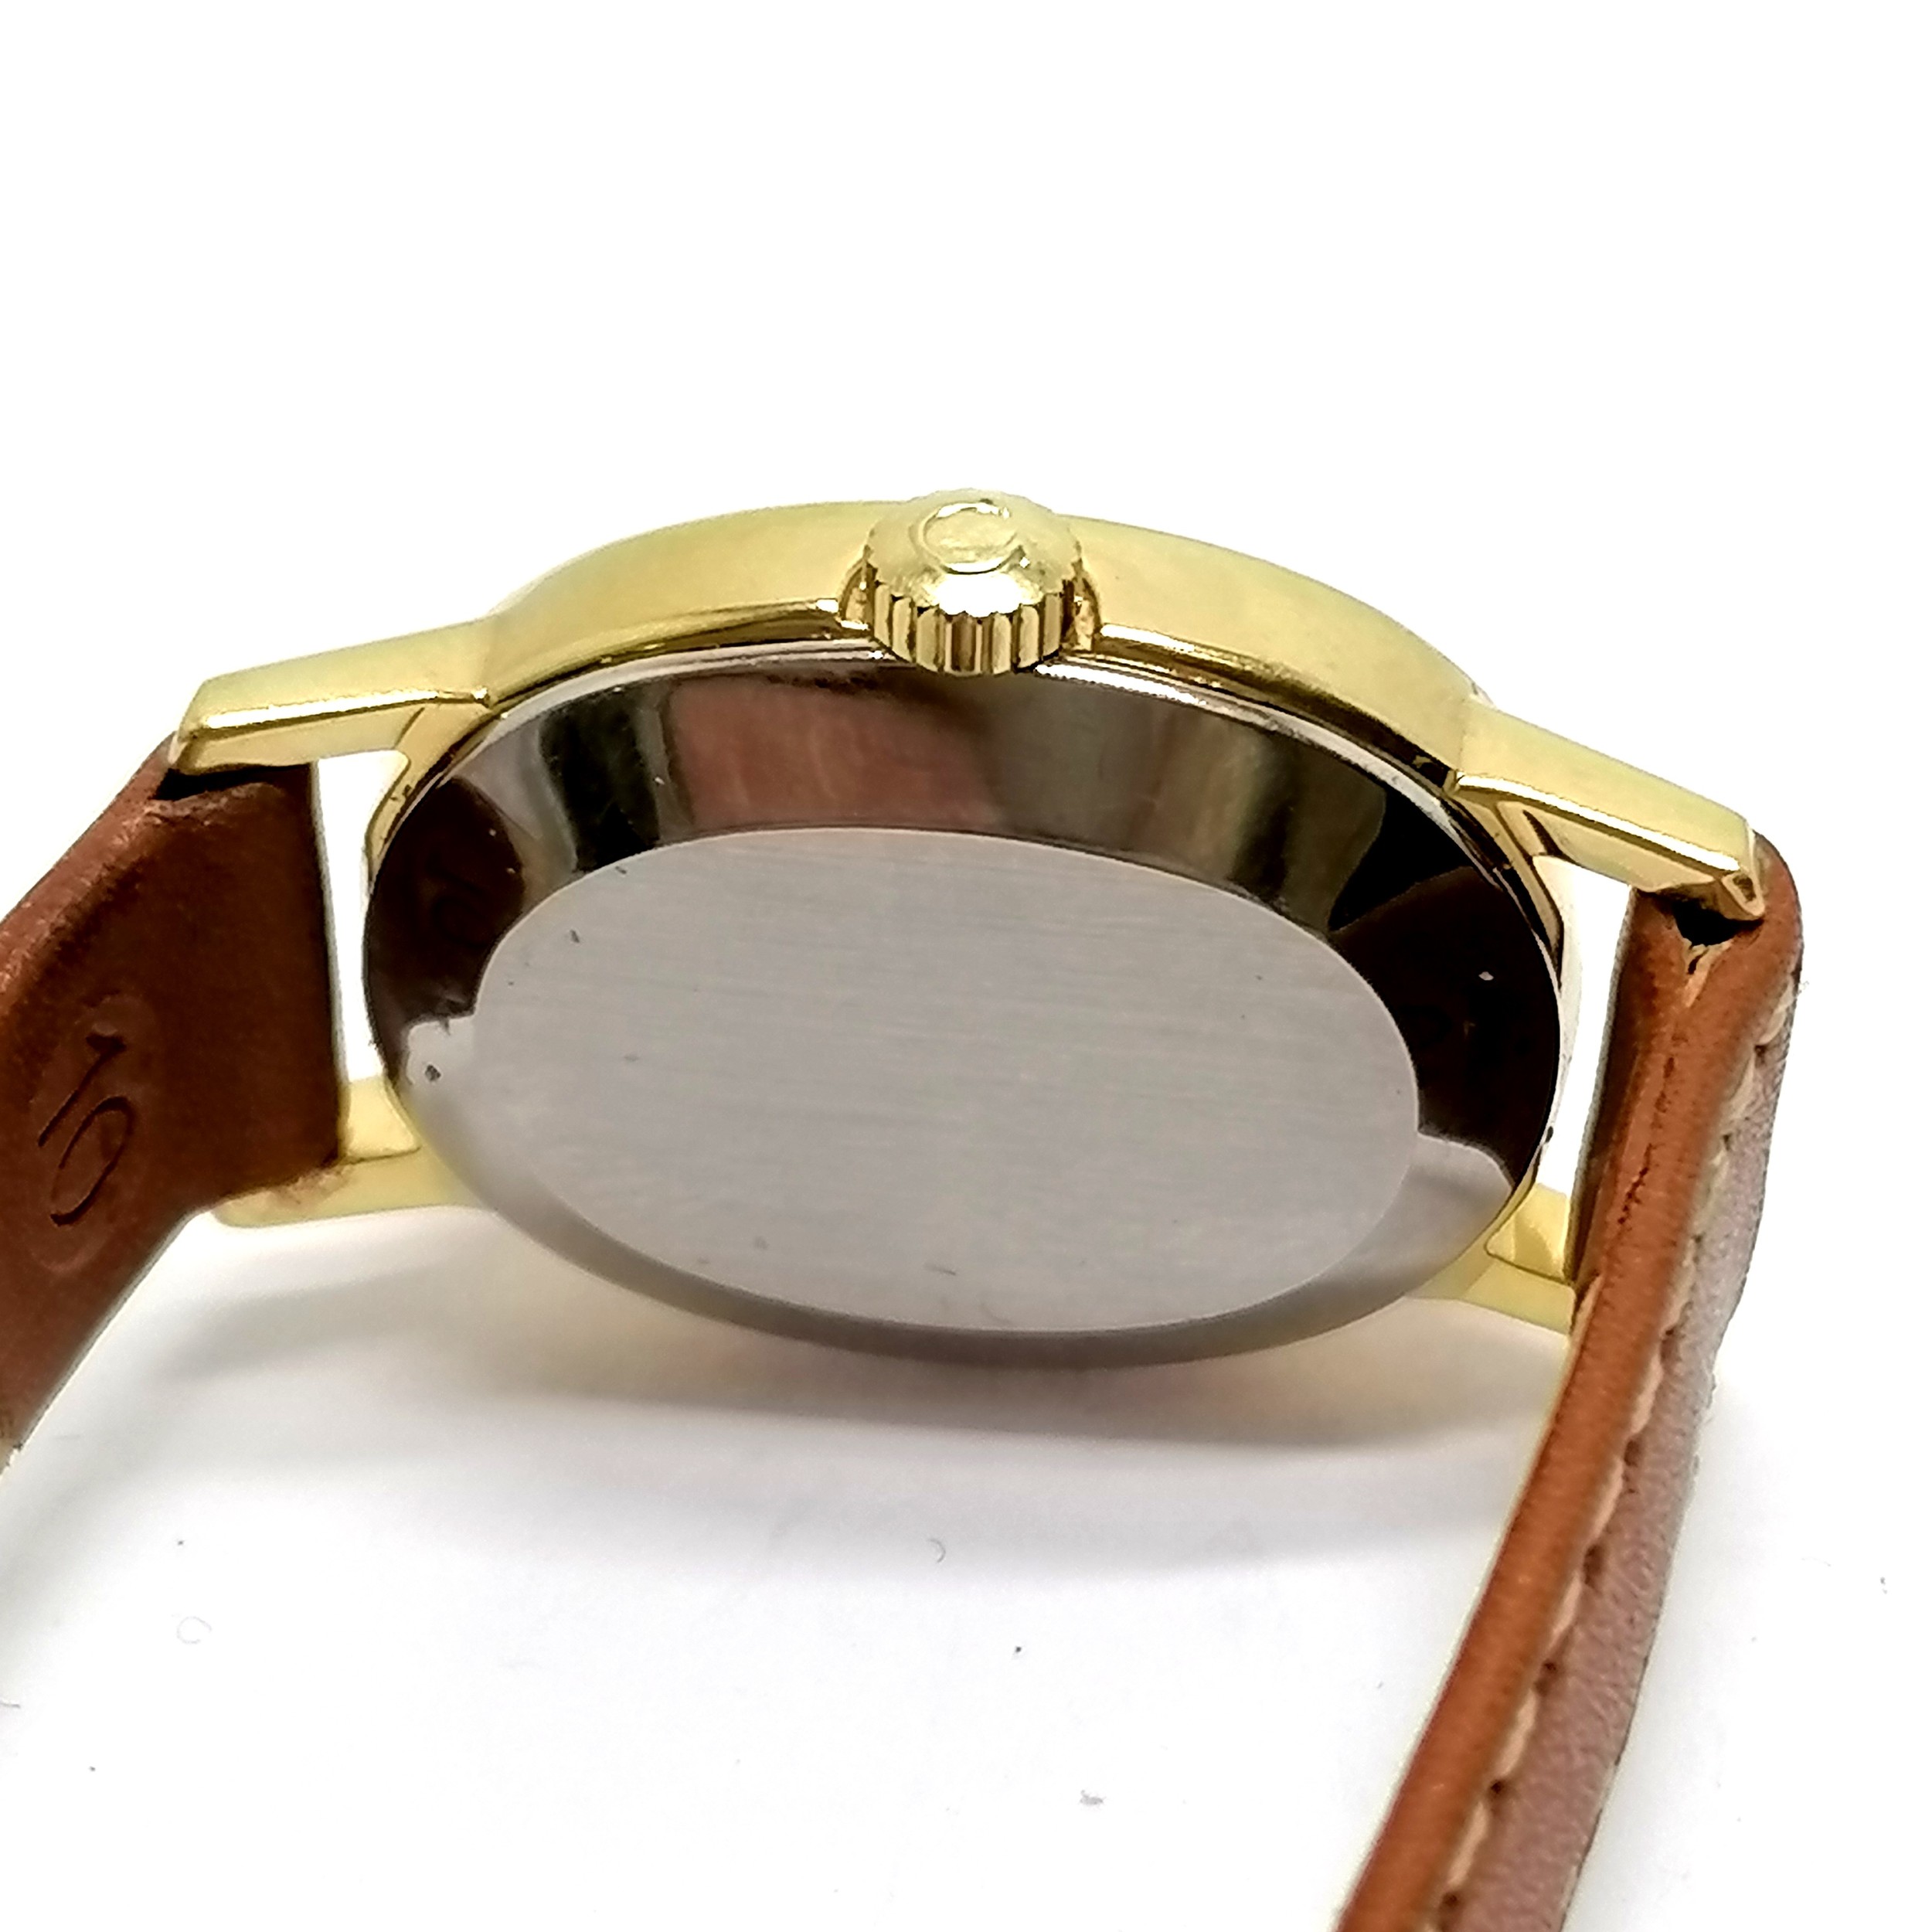 Omega ladies gold plated Deville manual wind wristwatch - no obvious damage & running BUT WE - Image 2 of 2